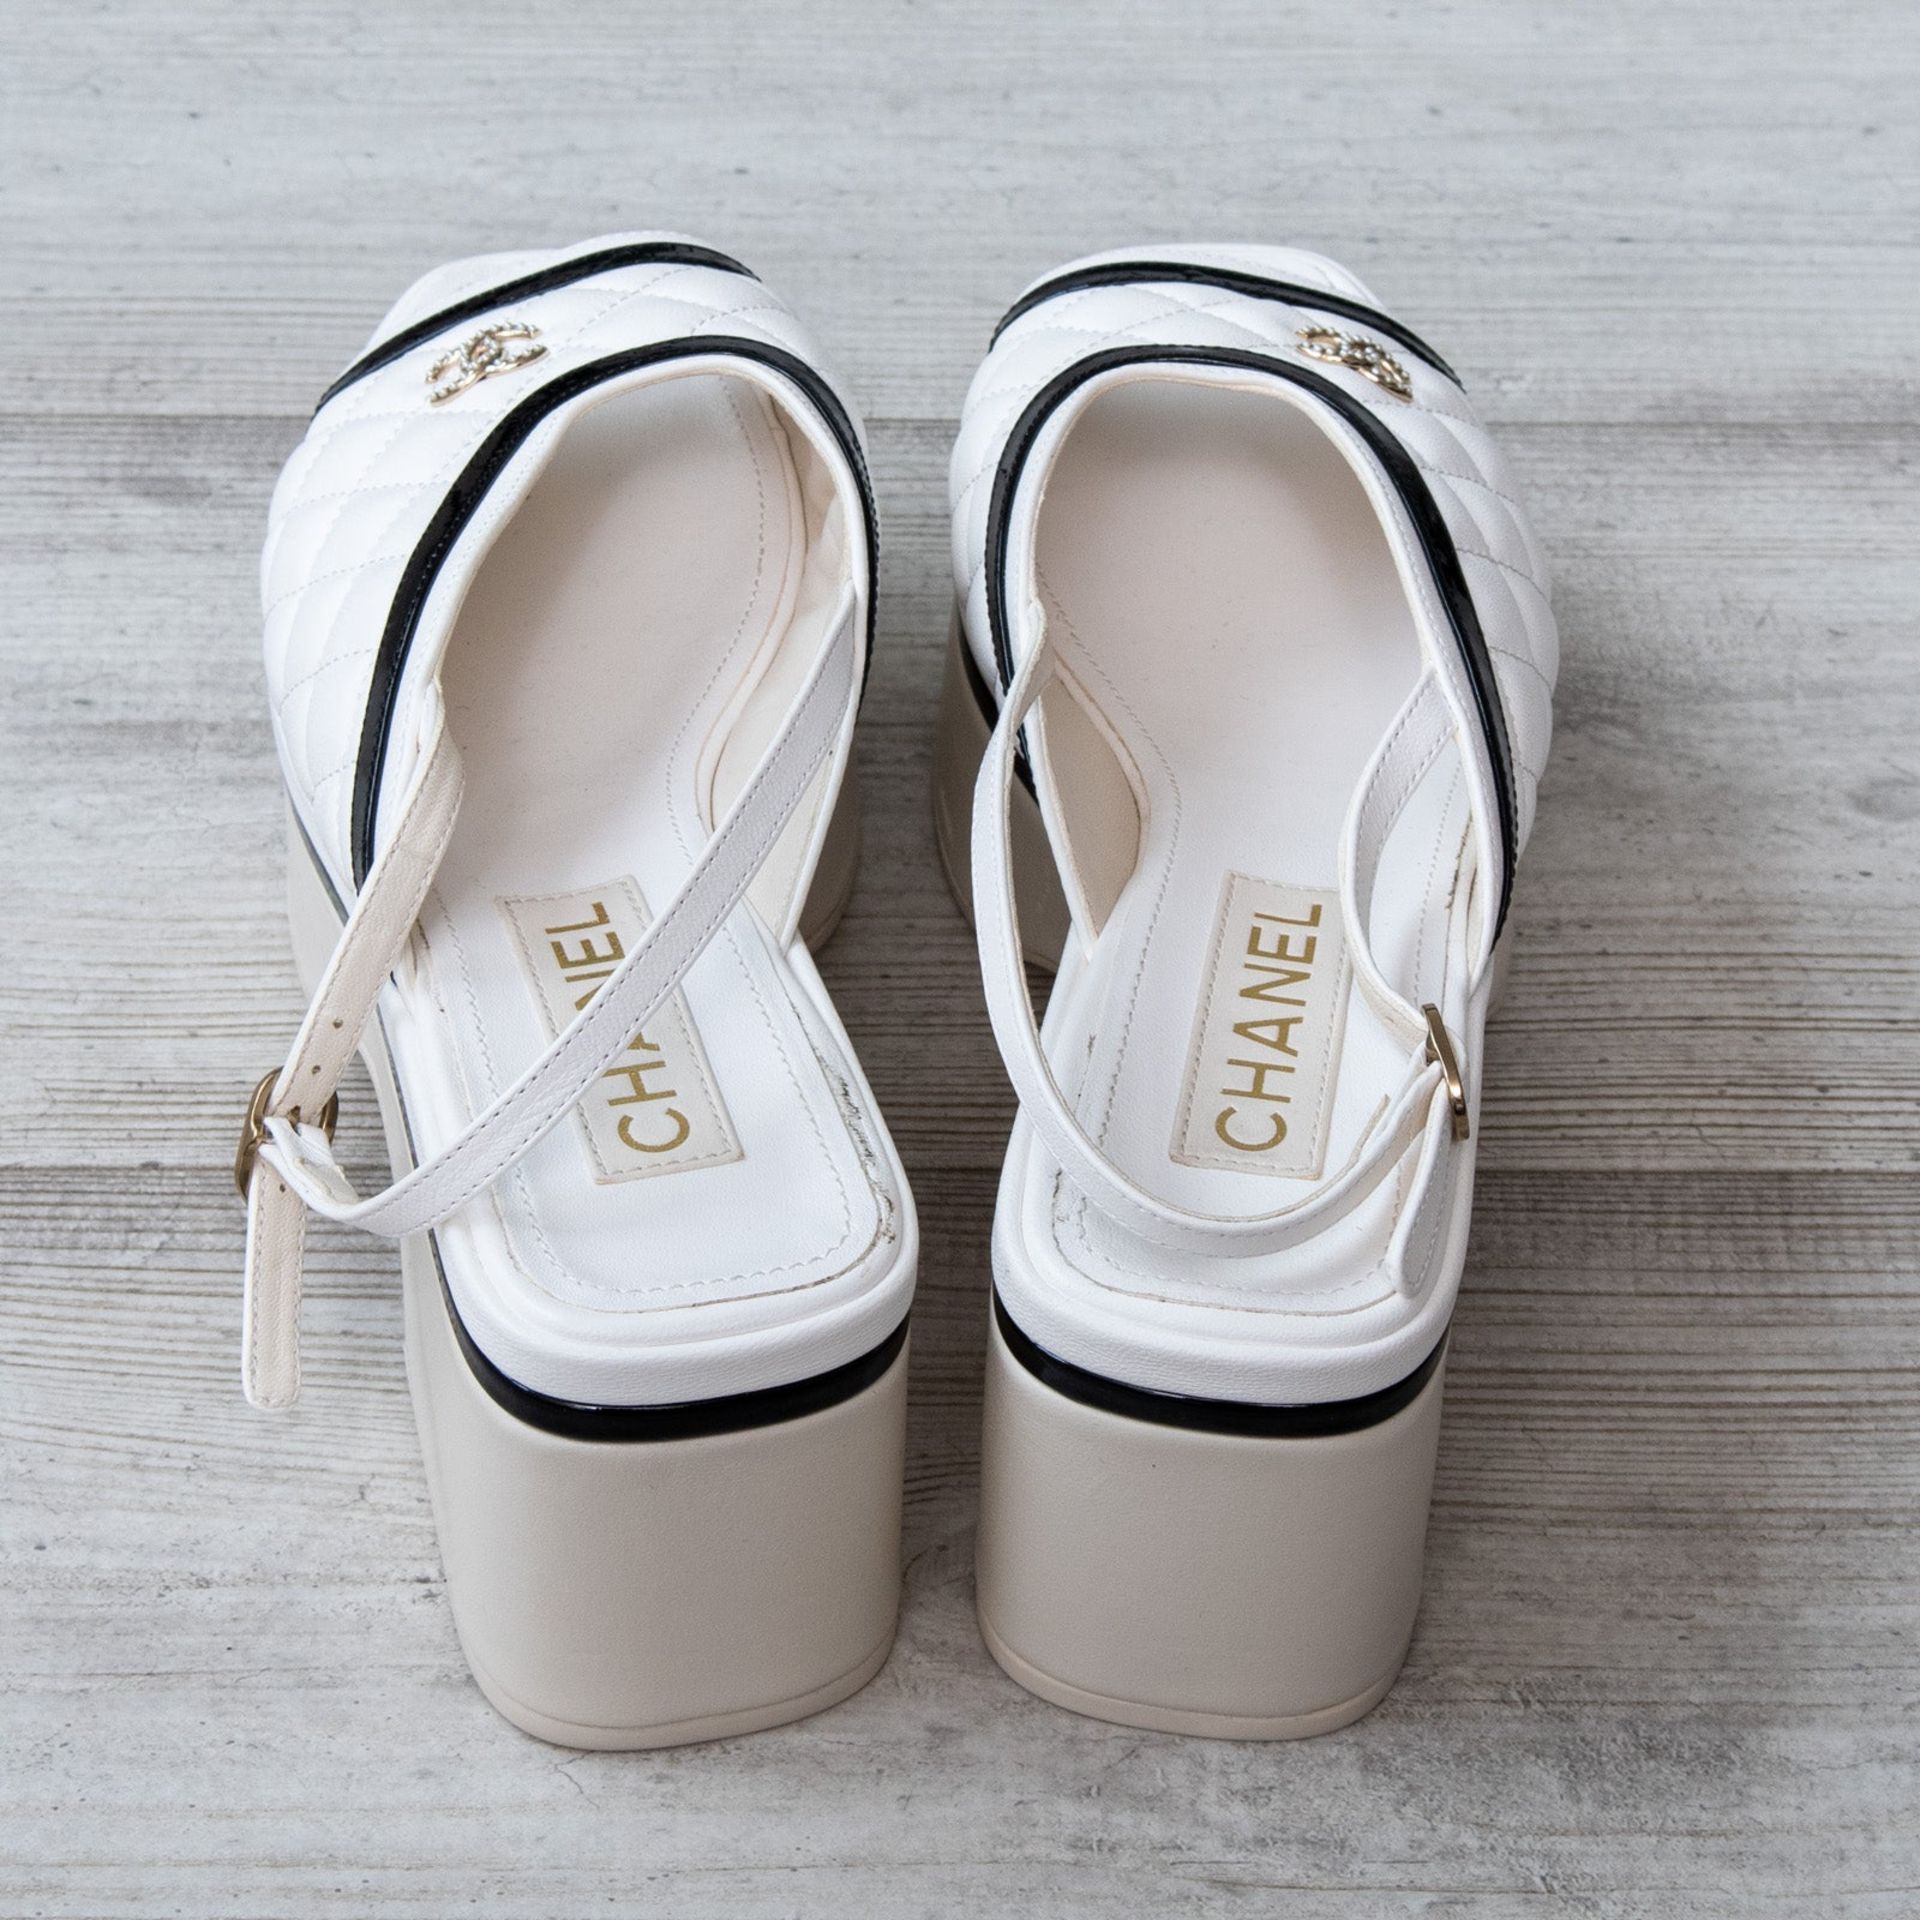 Chanel White Open Toe Wedge Sandals - Image 5 of 6